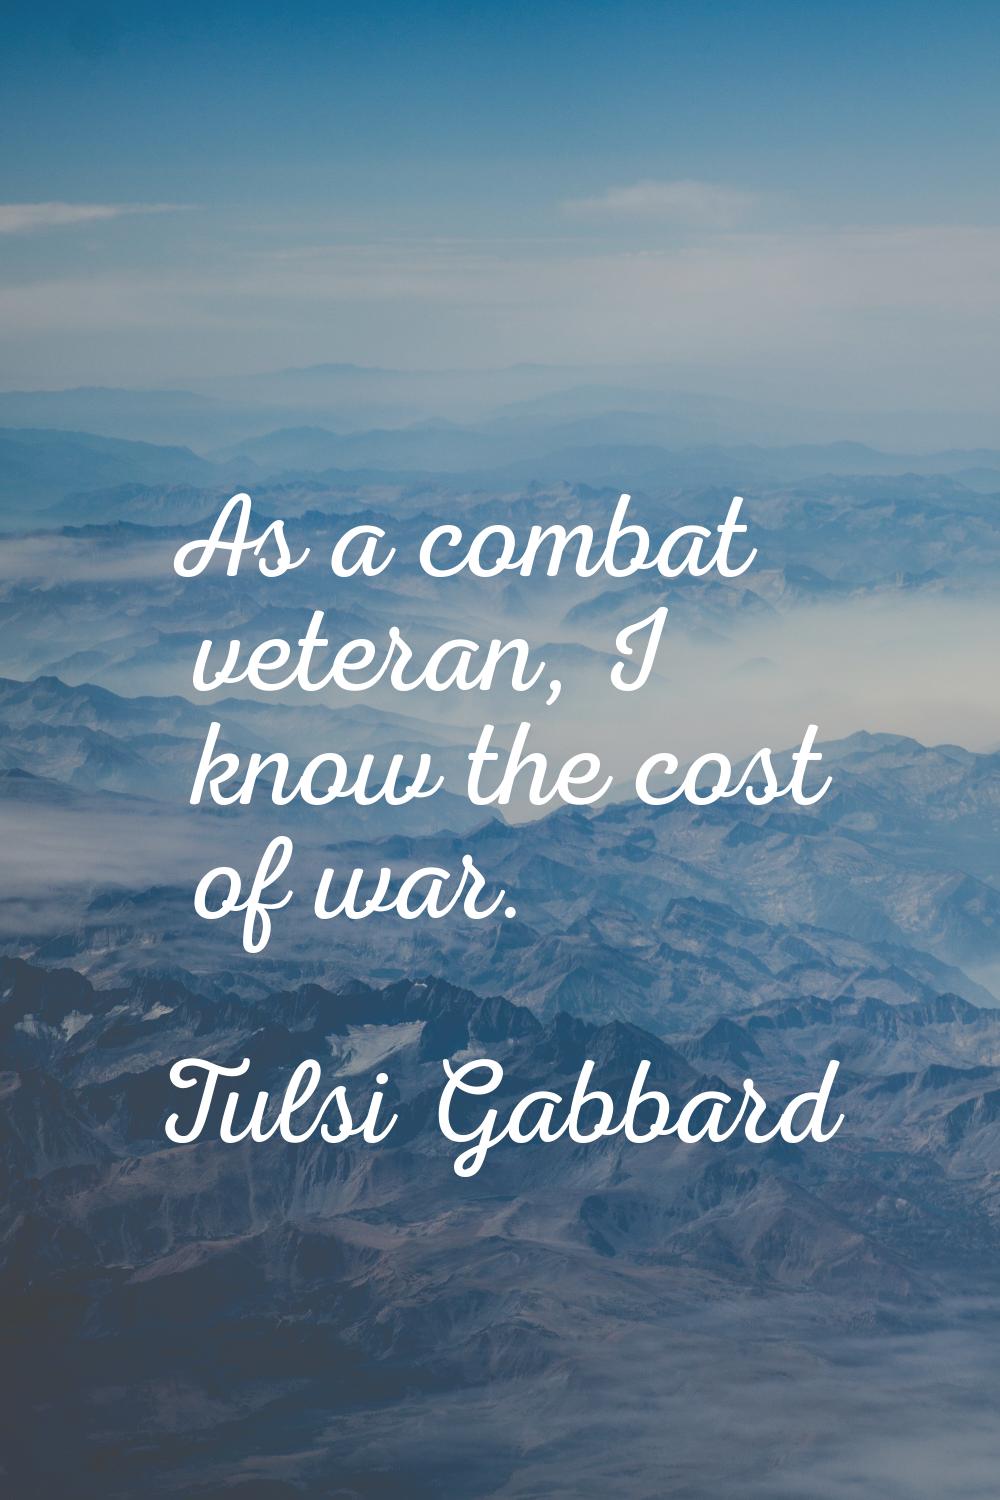 As a combat veteran, I know the cost of war.